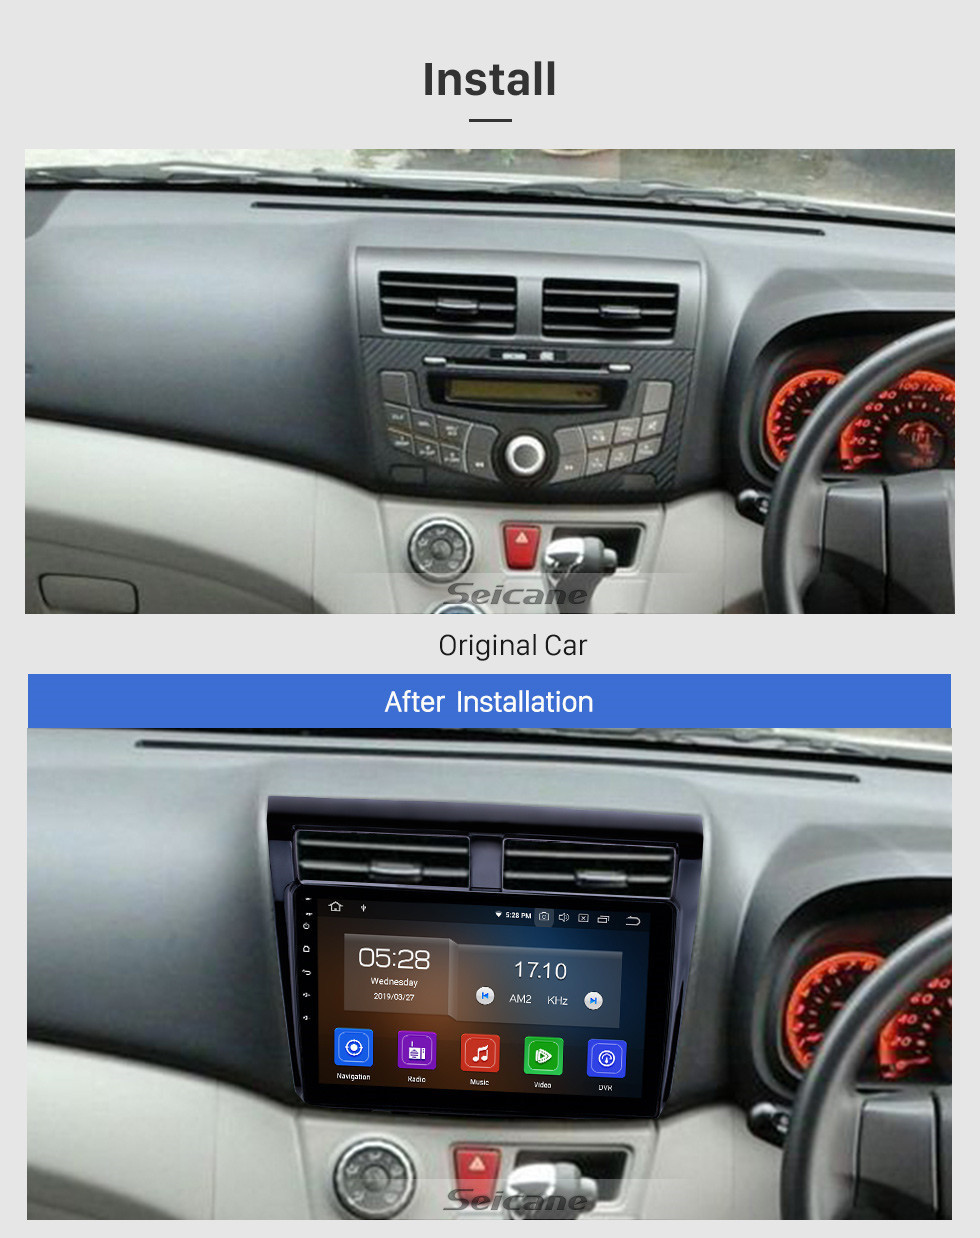 Seicane 10.1 inch Android 11.0 GPS Navigation Radio for 2012 Proton Myvi Bluetooth Wifi HD Touchscreen Carplay support DAB+ Steering Wheel Control DVR